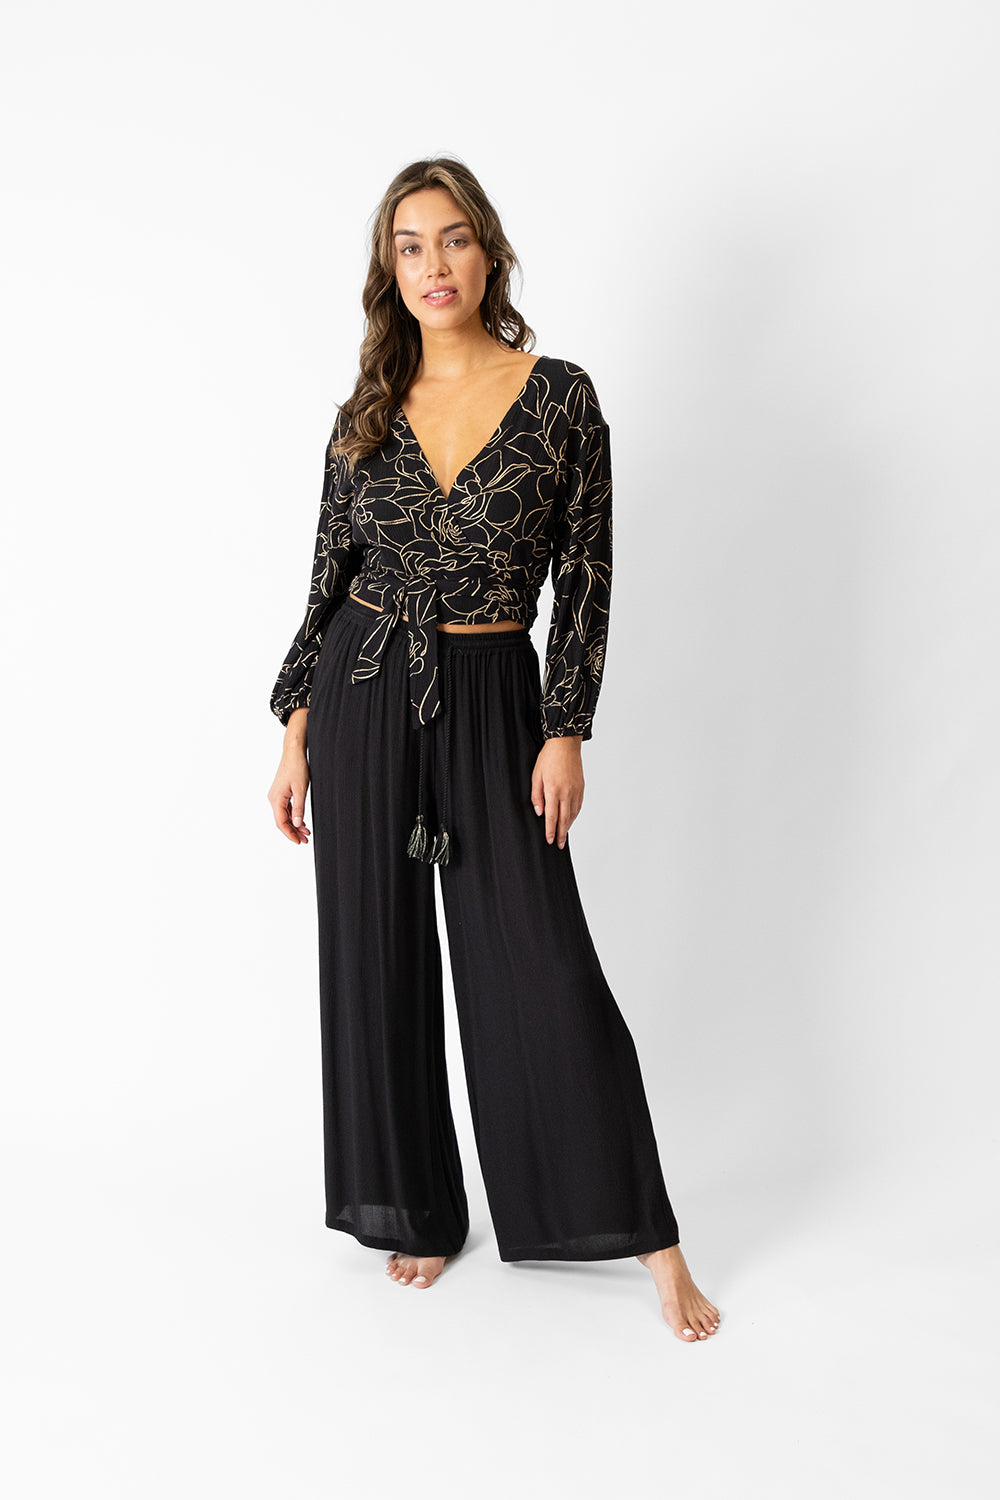 koy resort miami shine golden flower print long sleeve wrap top for spring 2024 women's fashion collection worn with miami  wide leg pants